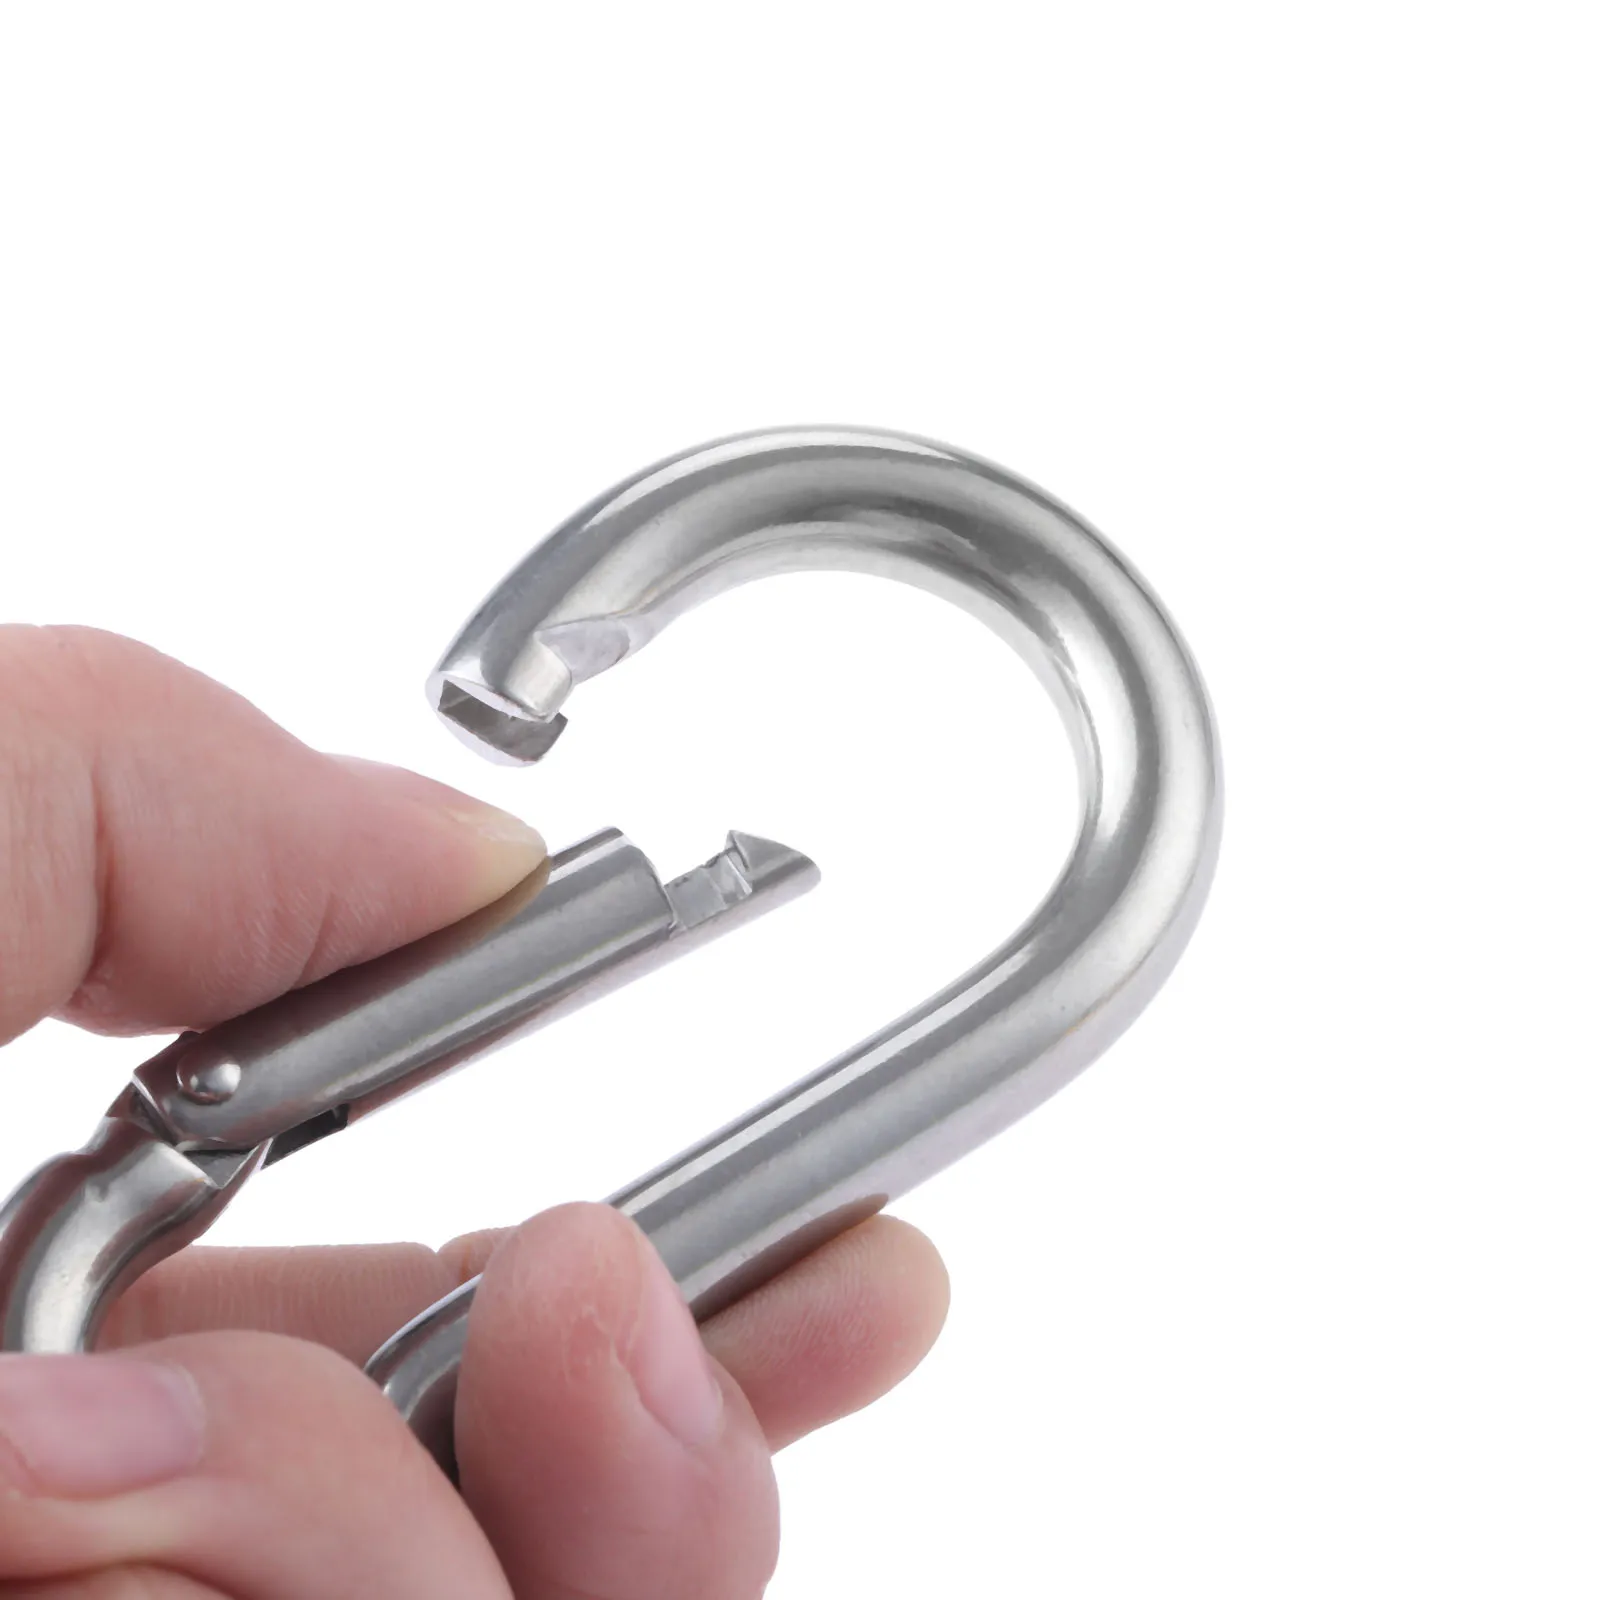 1 Pc Heavy Duty Marine Grade Stainless Steel 316 Carabiner Spring Snap Hook  Loop Clip Keychain M4 M5 M6 M8 M10 M12 Boats Diving